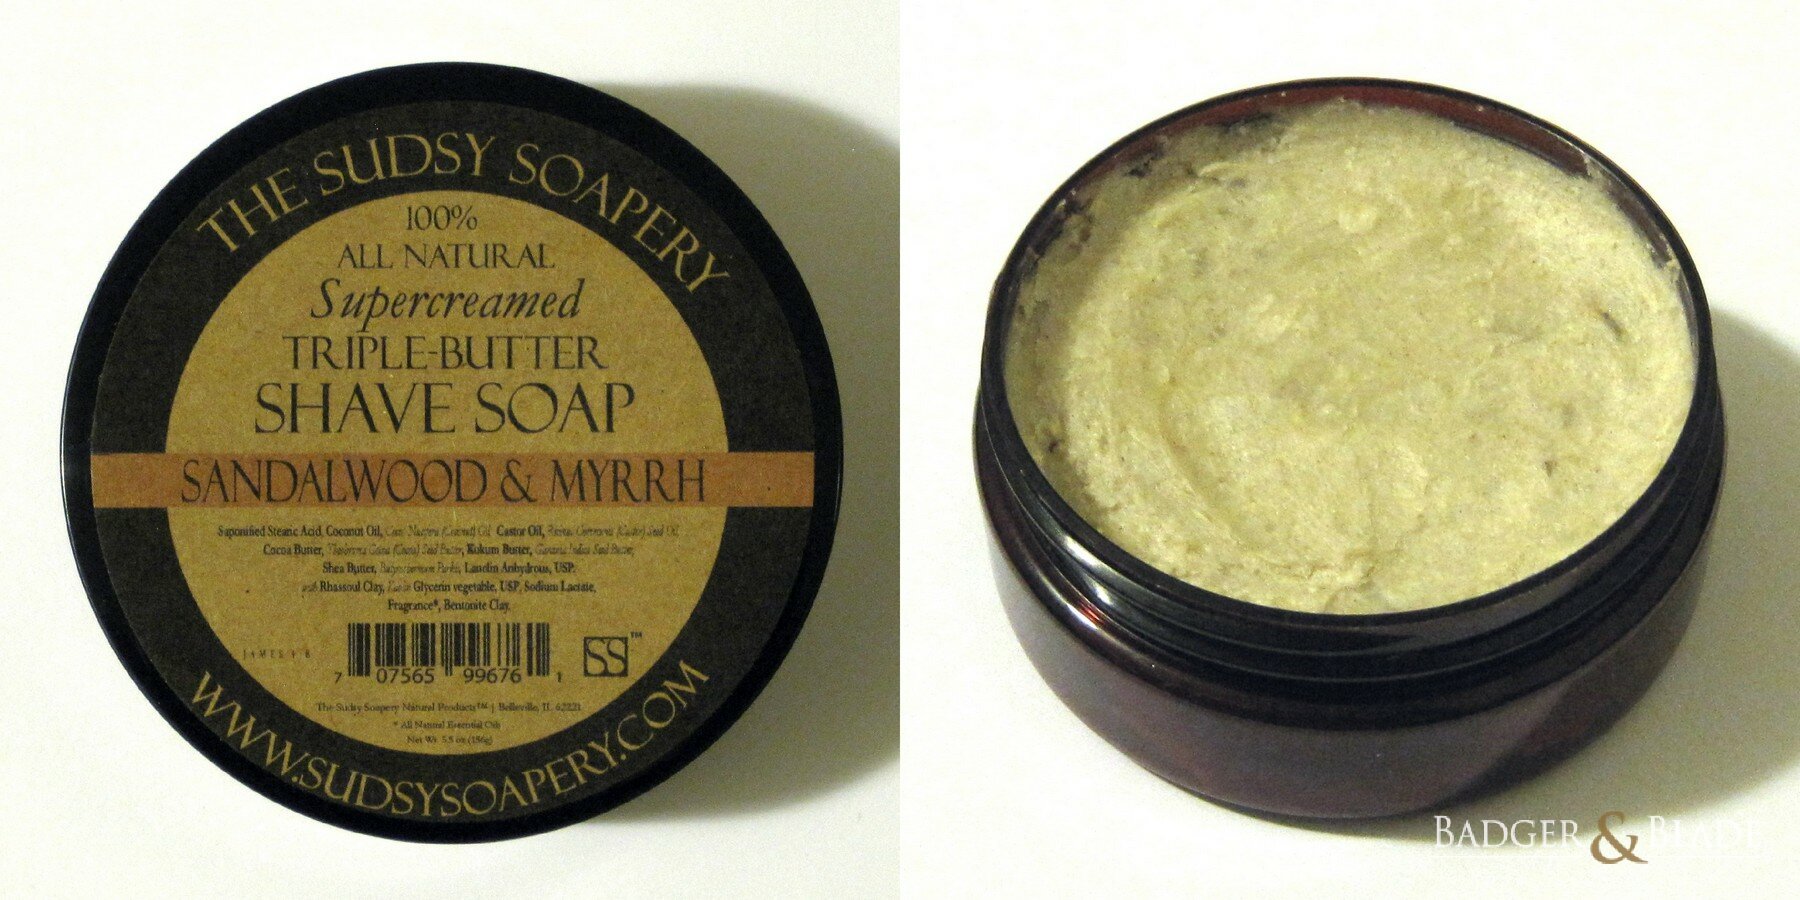 The Sudsy Soapery Sandalwood & Myrrh Shave Soap with 0.5 oz. Removed